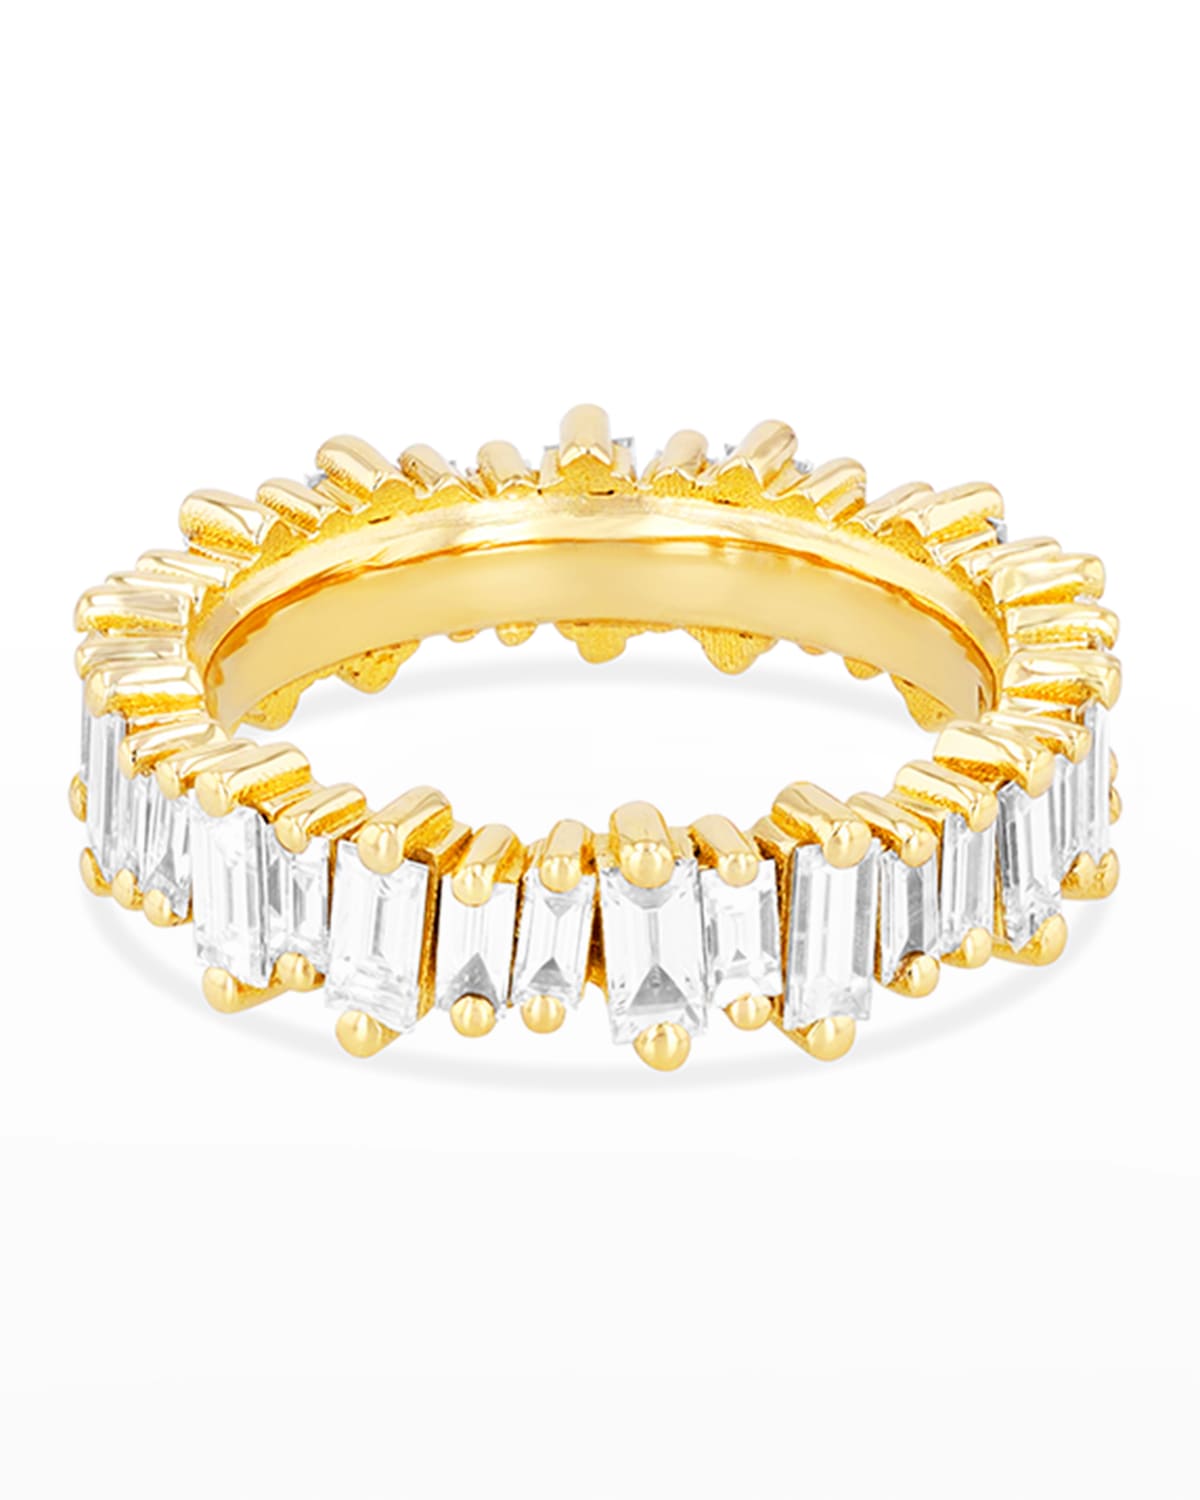 Suzanne Kalan 18k Diamond New Classic Eternity Band Ring Size 4-8 In Yellow/gold